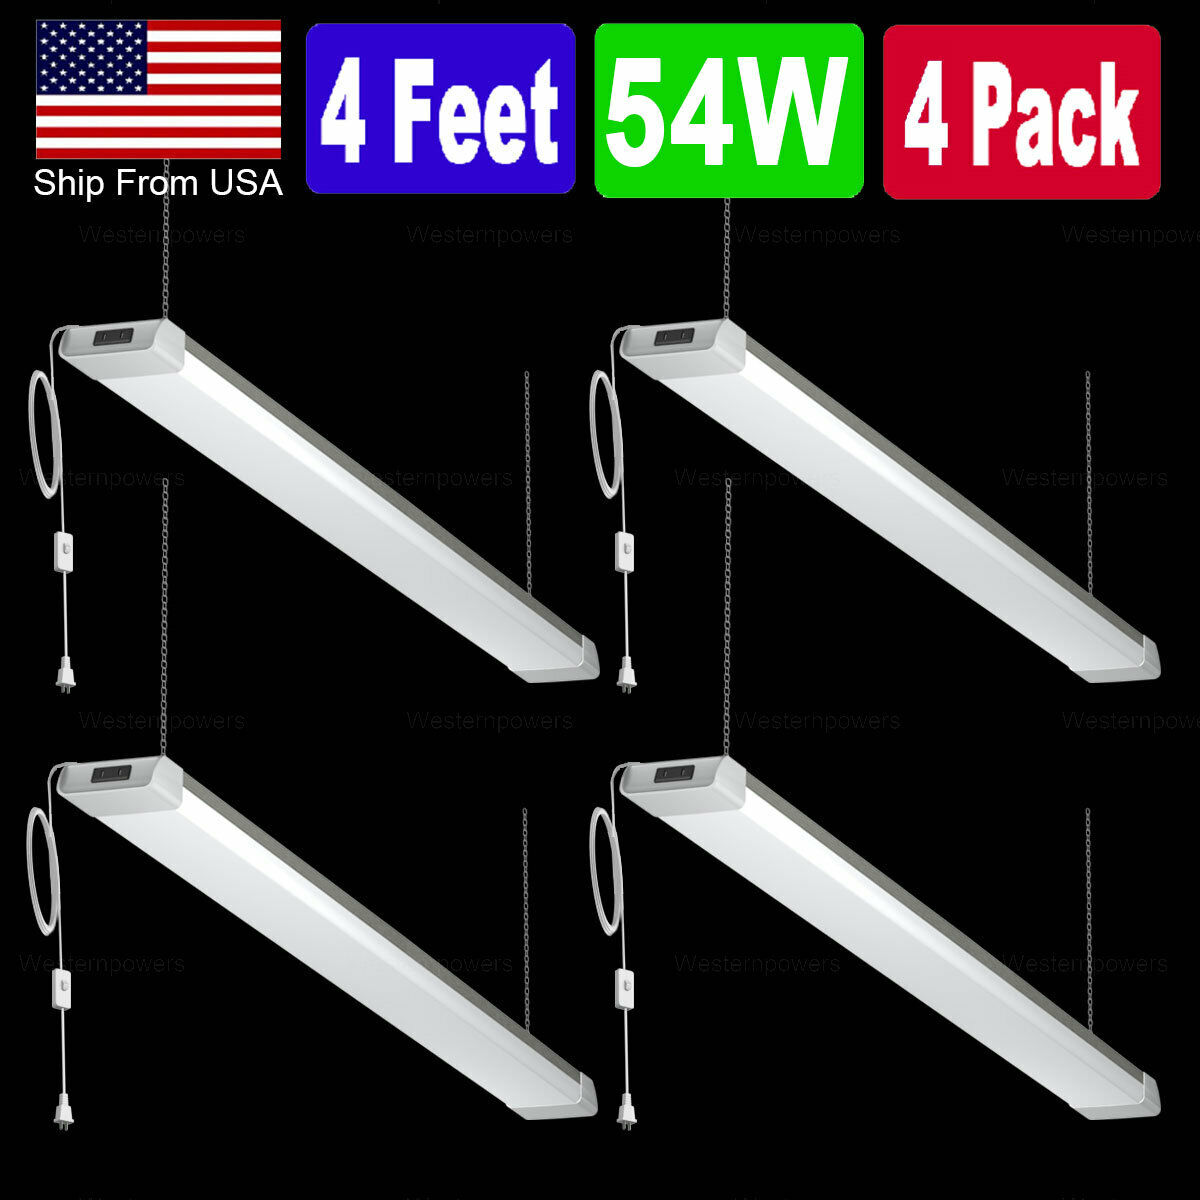 Westernpowers 4 Pack 54W LED Shop Light Garage Workbench Ceiling Lamp Linkable westernpowers LIGHT